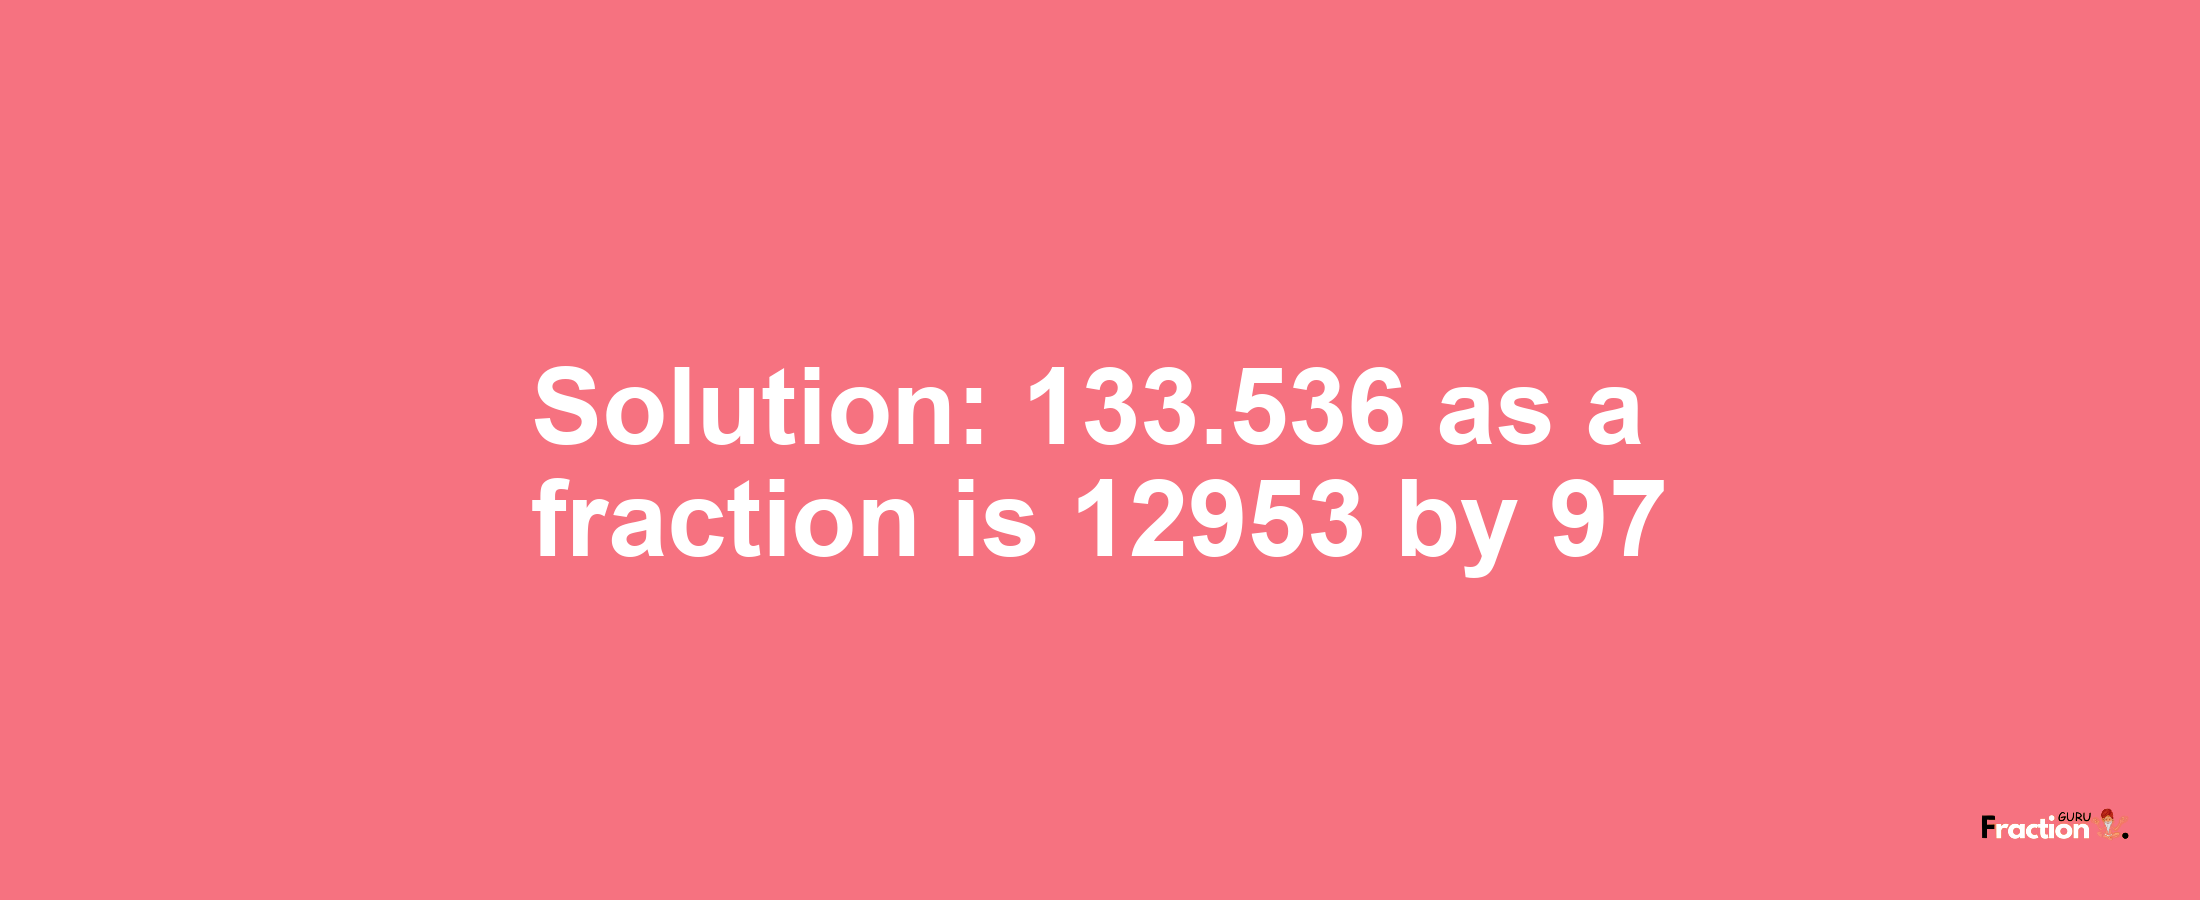 Solution:133.536 as a fraction is 12953/97